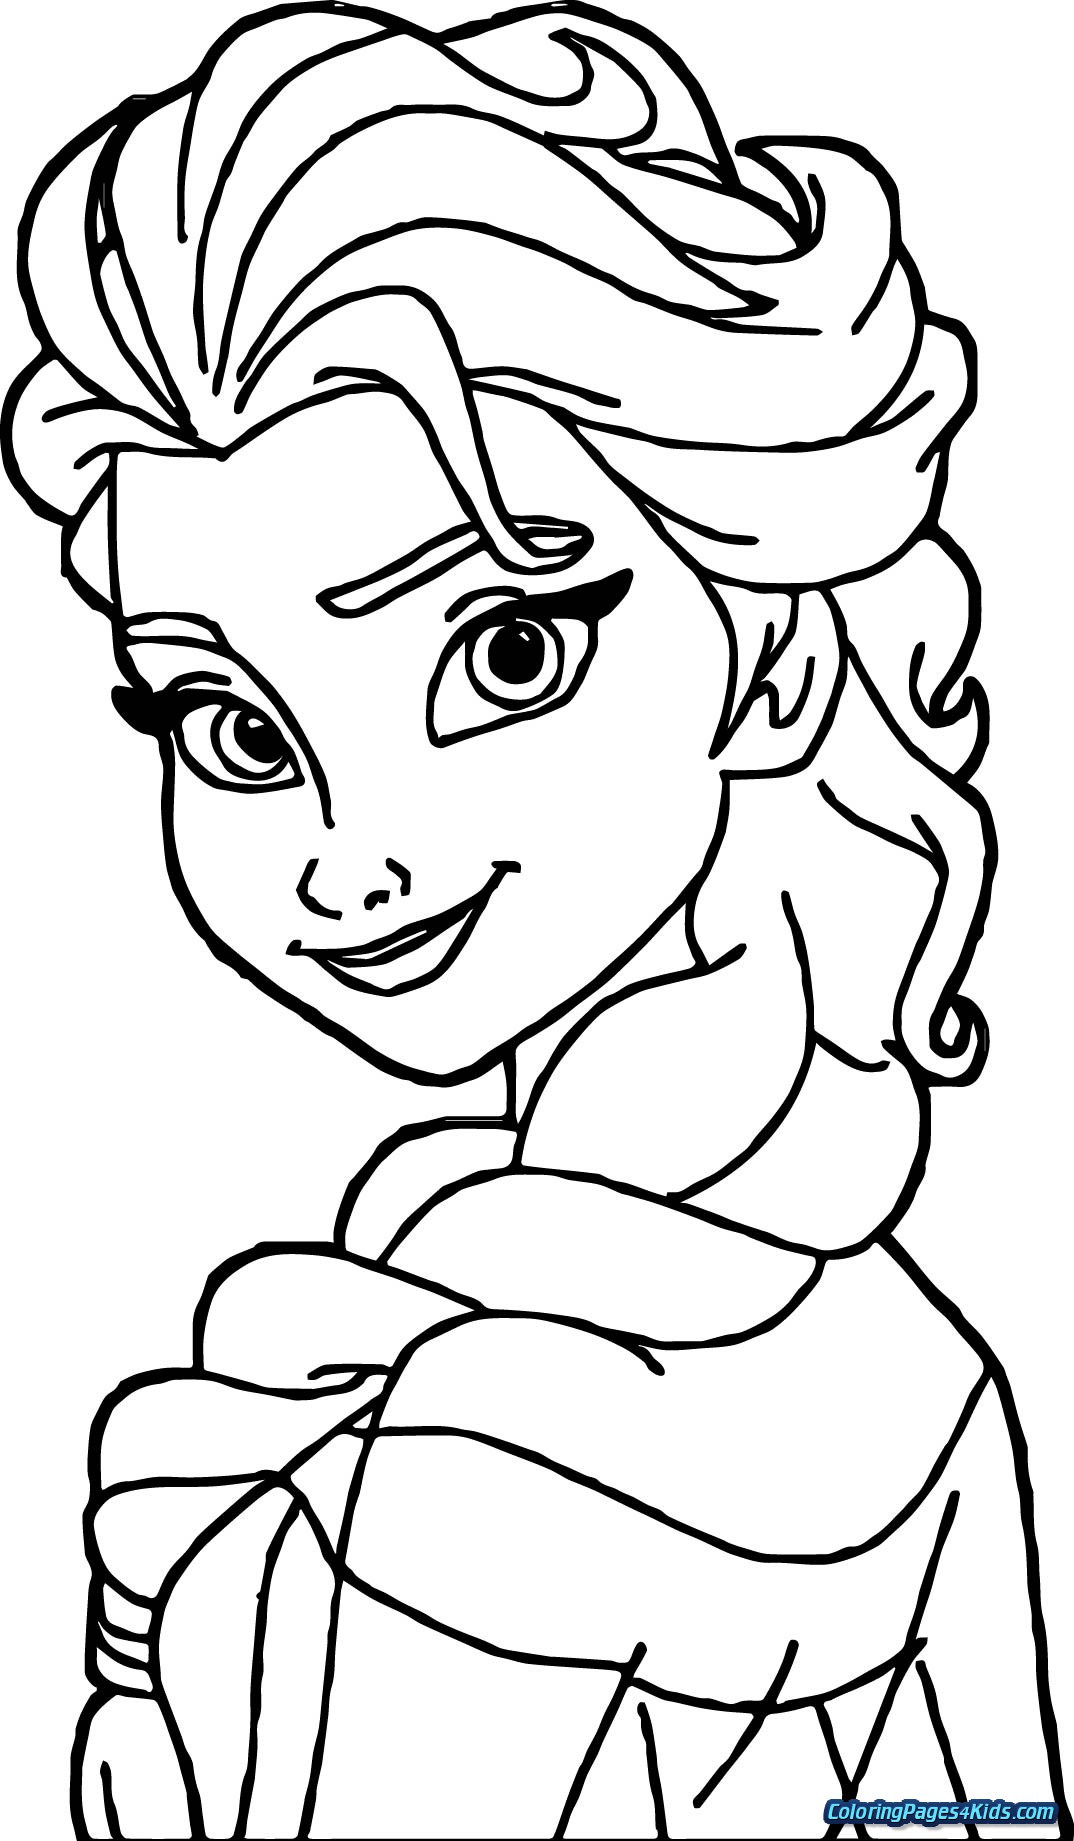 Frozen Coloring Pages For Toddlers
 Elsa Frozen Coloring Pages